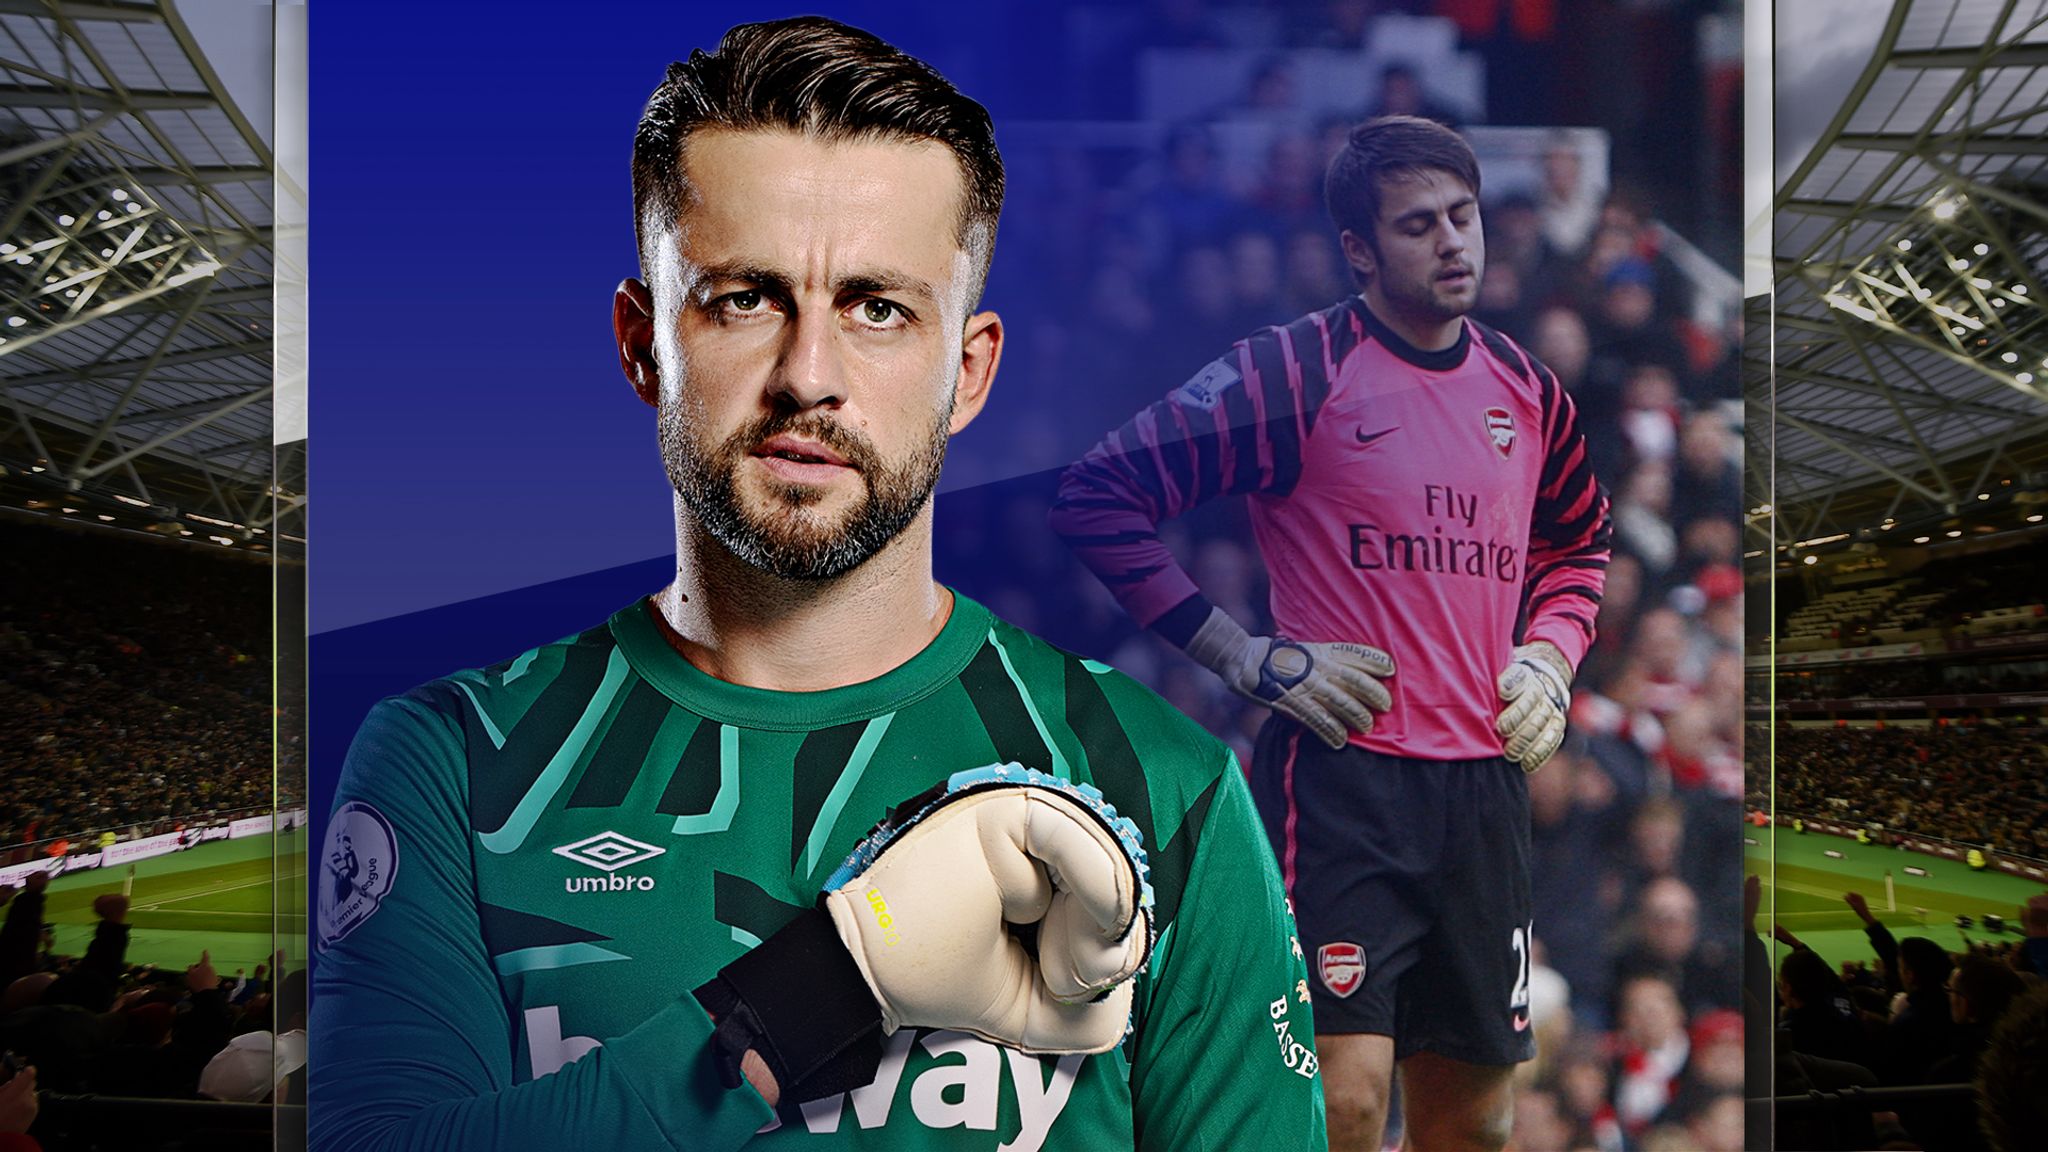 Lukasz Fabianski exclusive interview: From struggling at Arsenal to starring for West Ham | Football News | Sky Sports